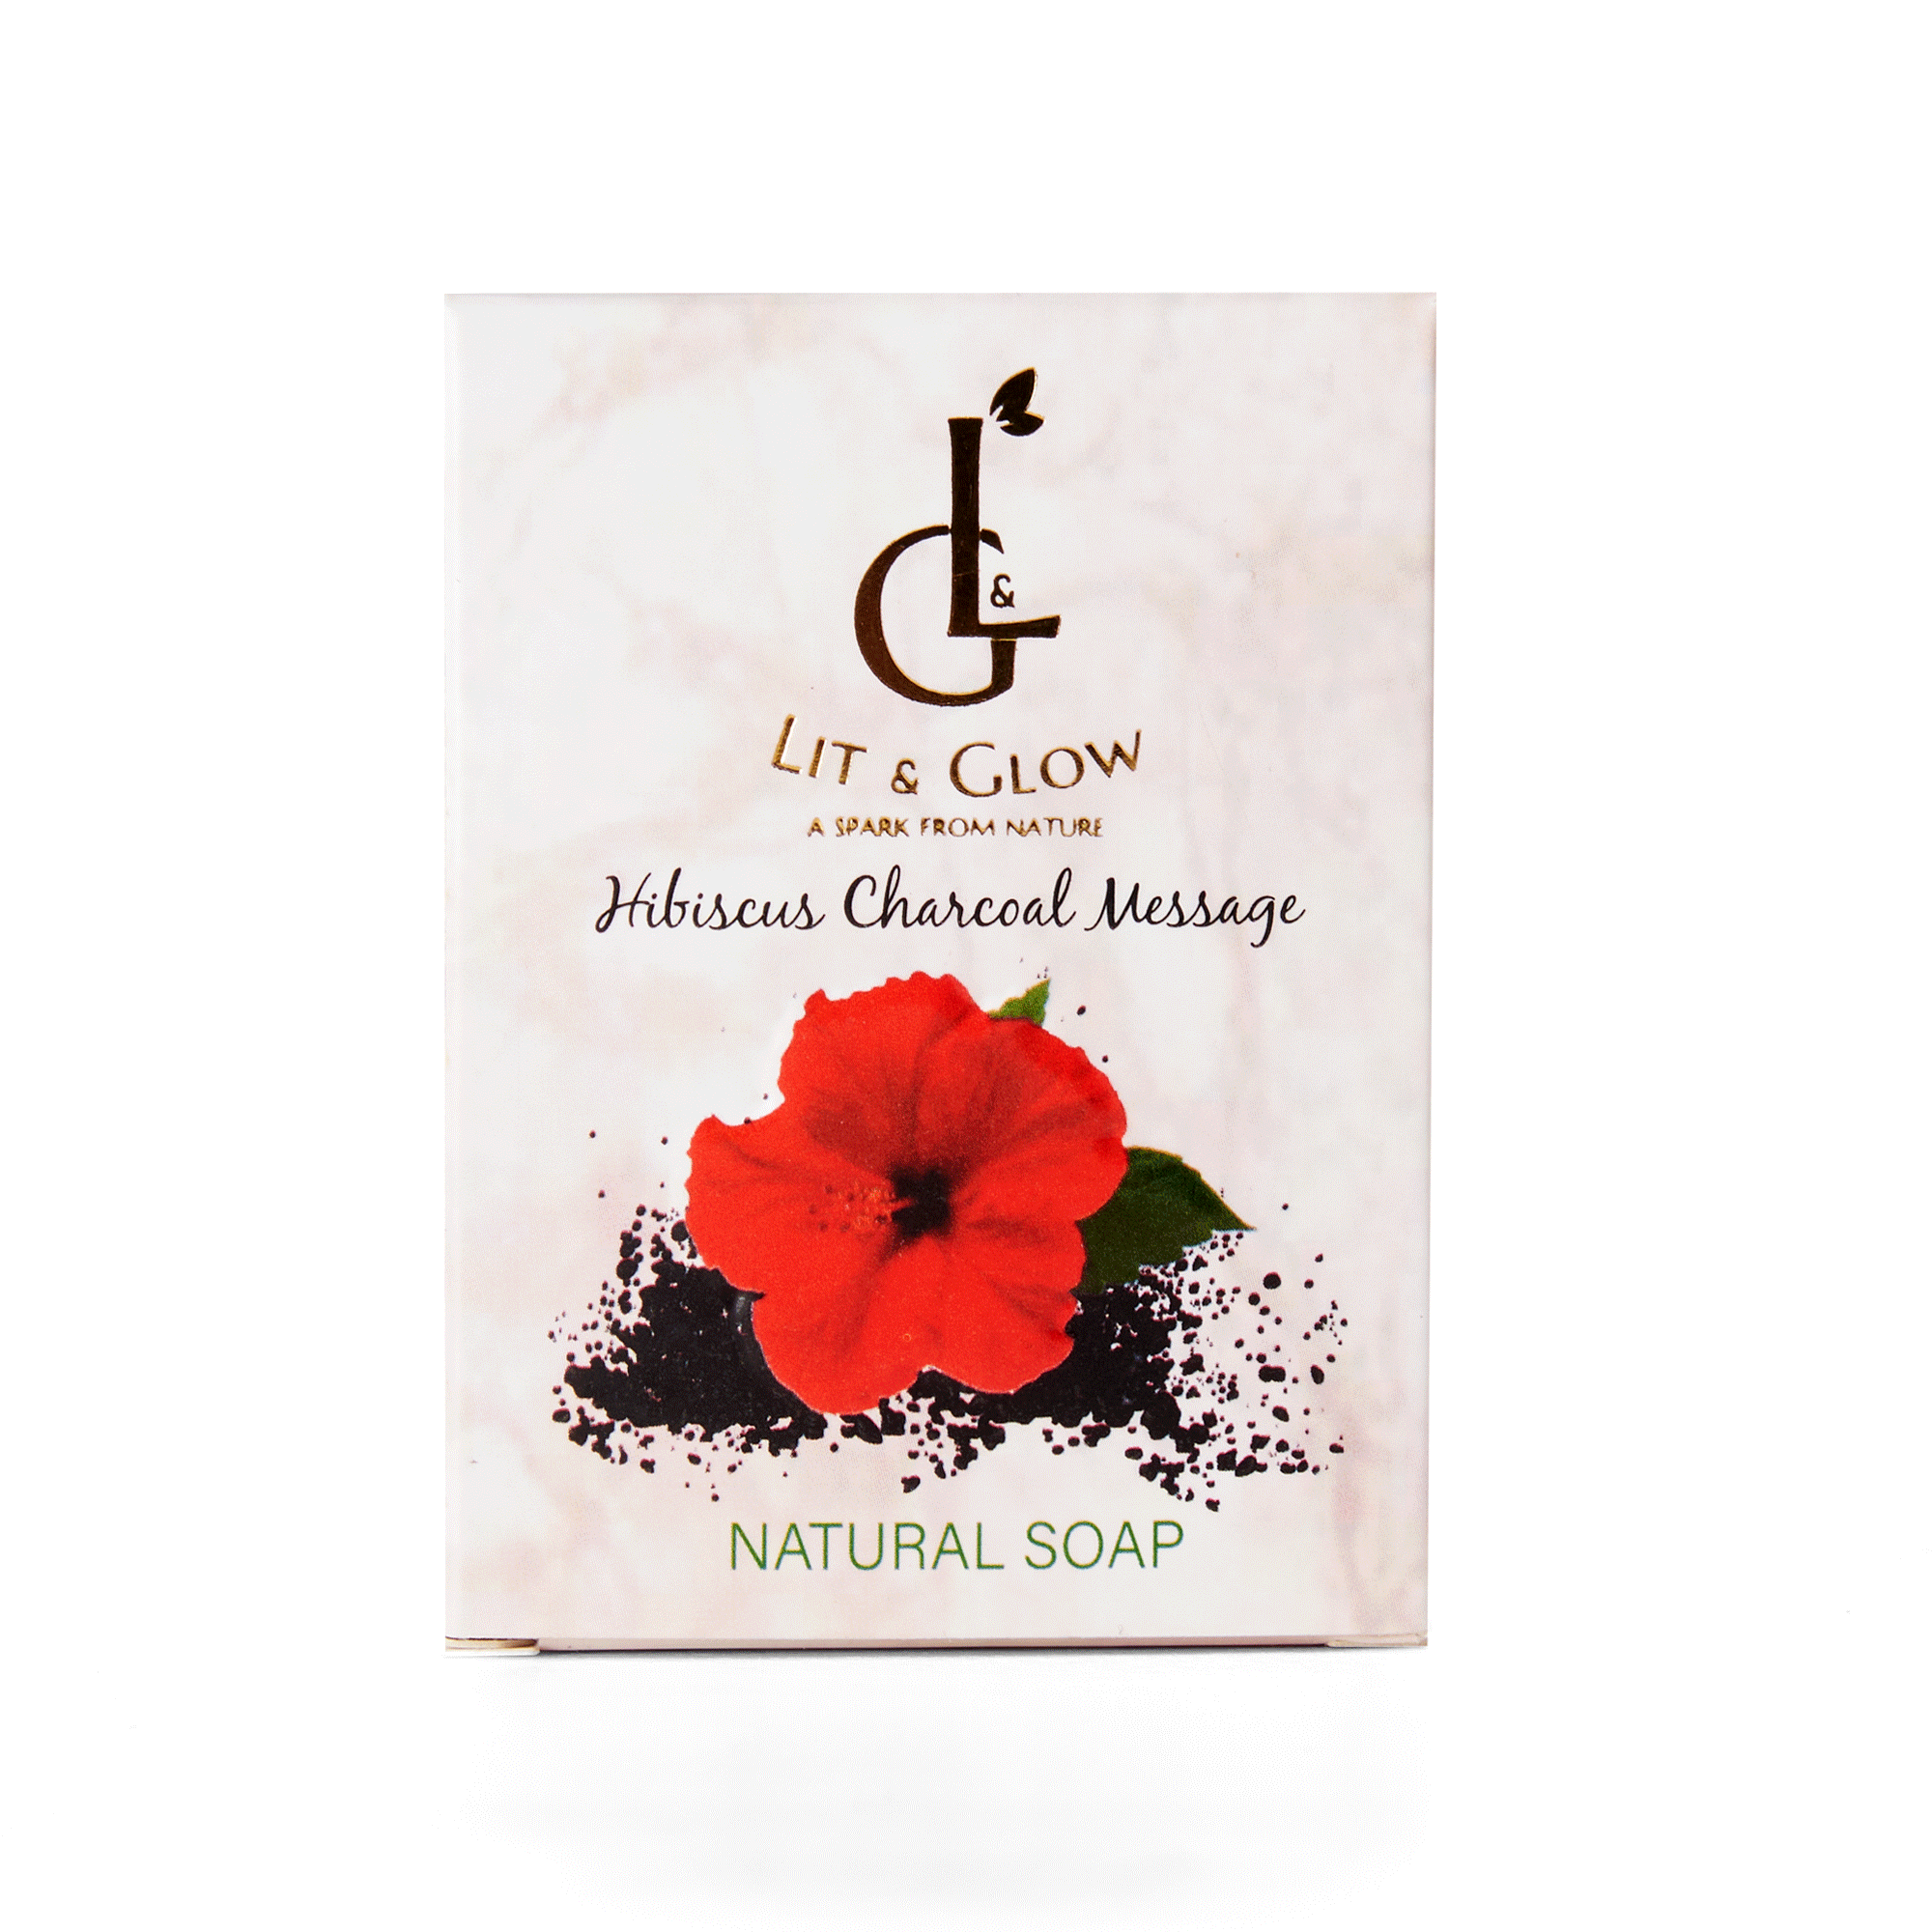 Hibiscus Charcoal Natural Soap Message 90 Gm